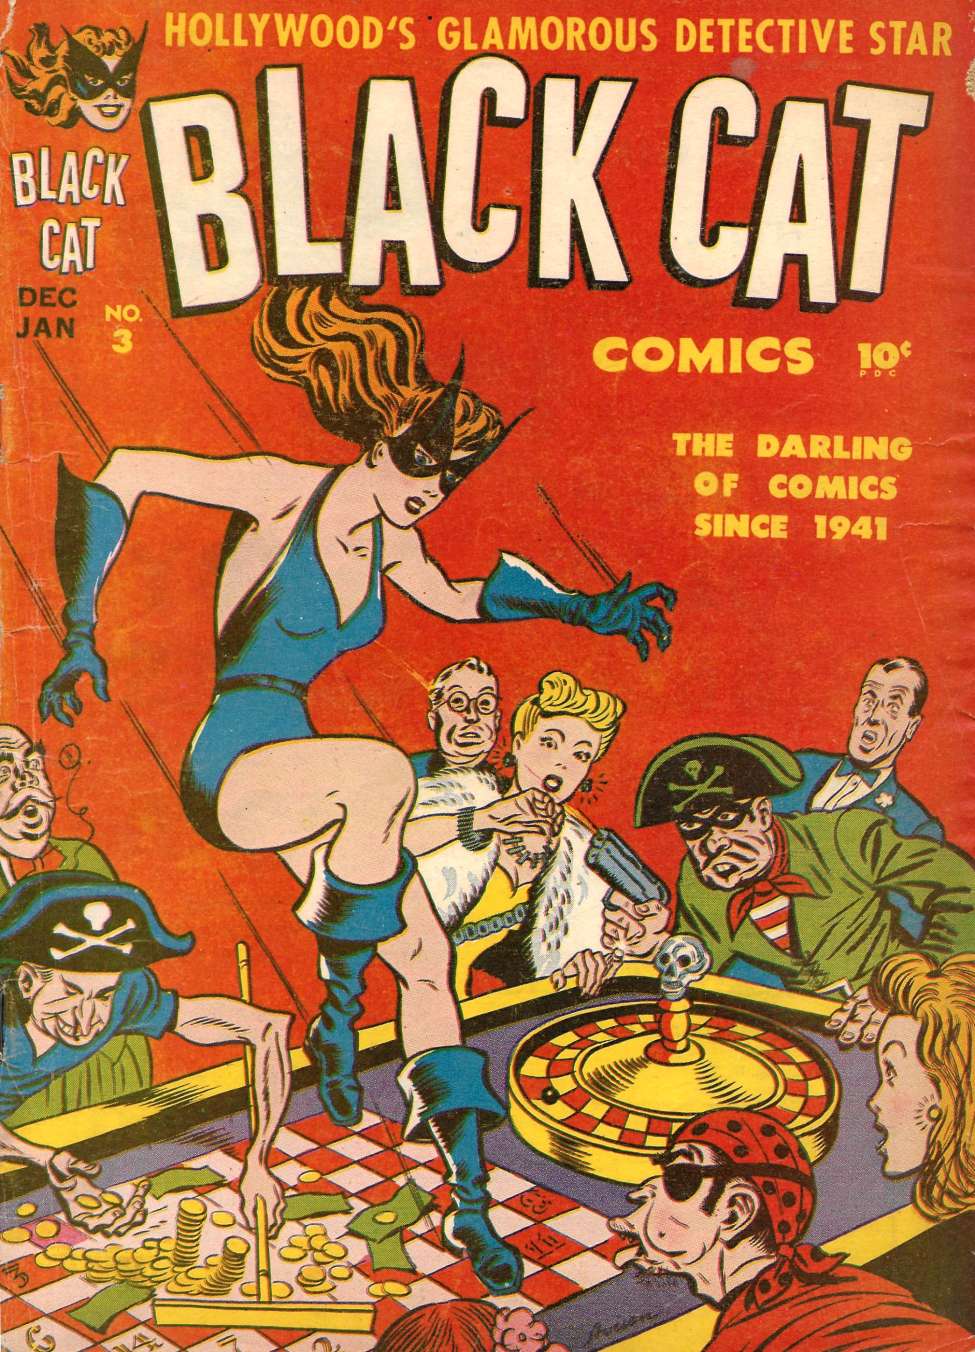 Book Cover For Black Cat 3 - Version 2